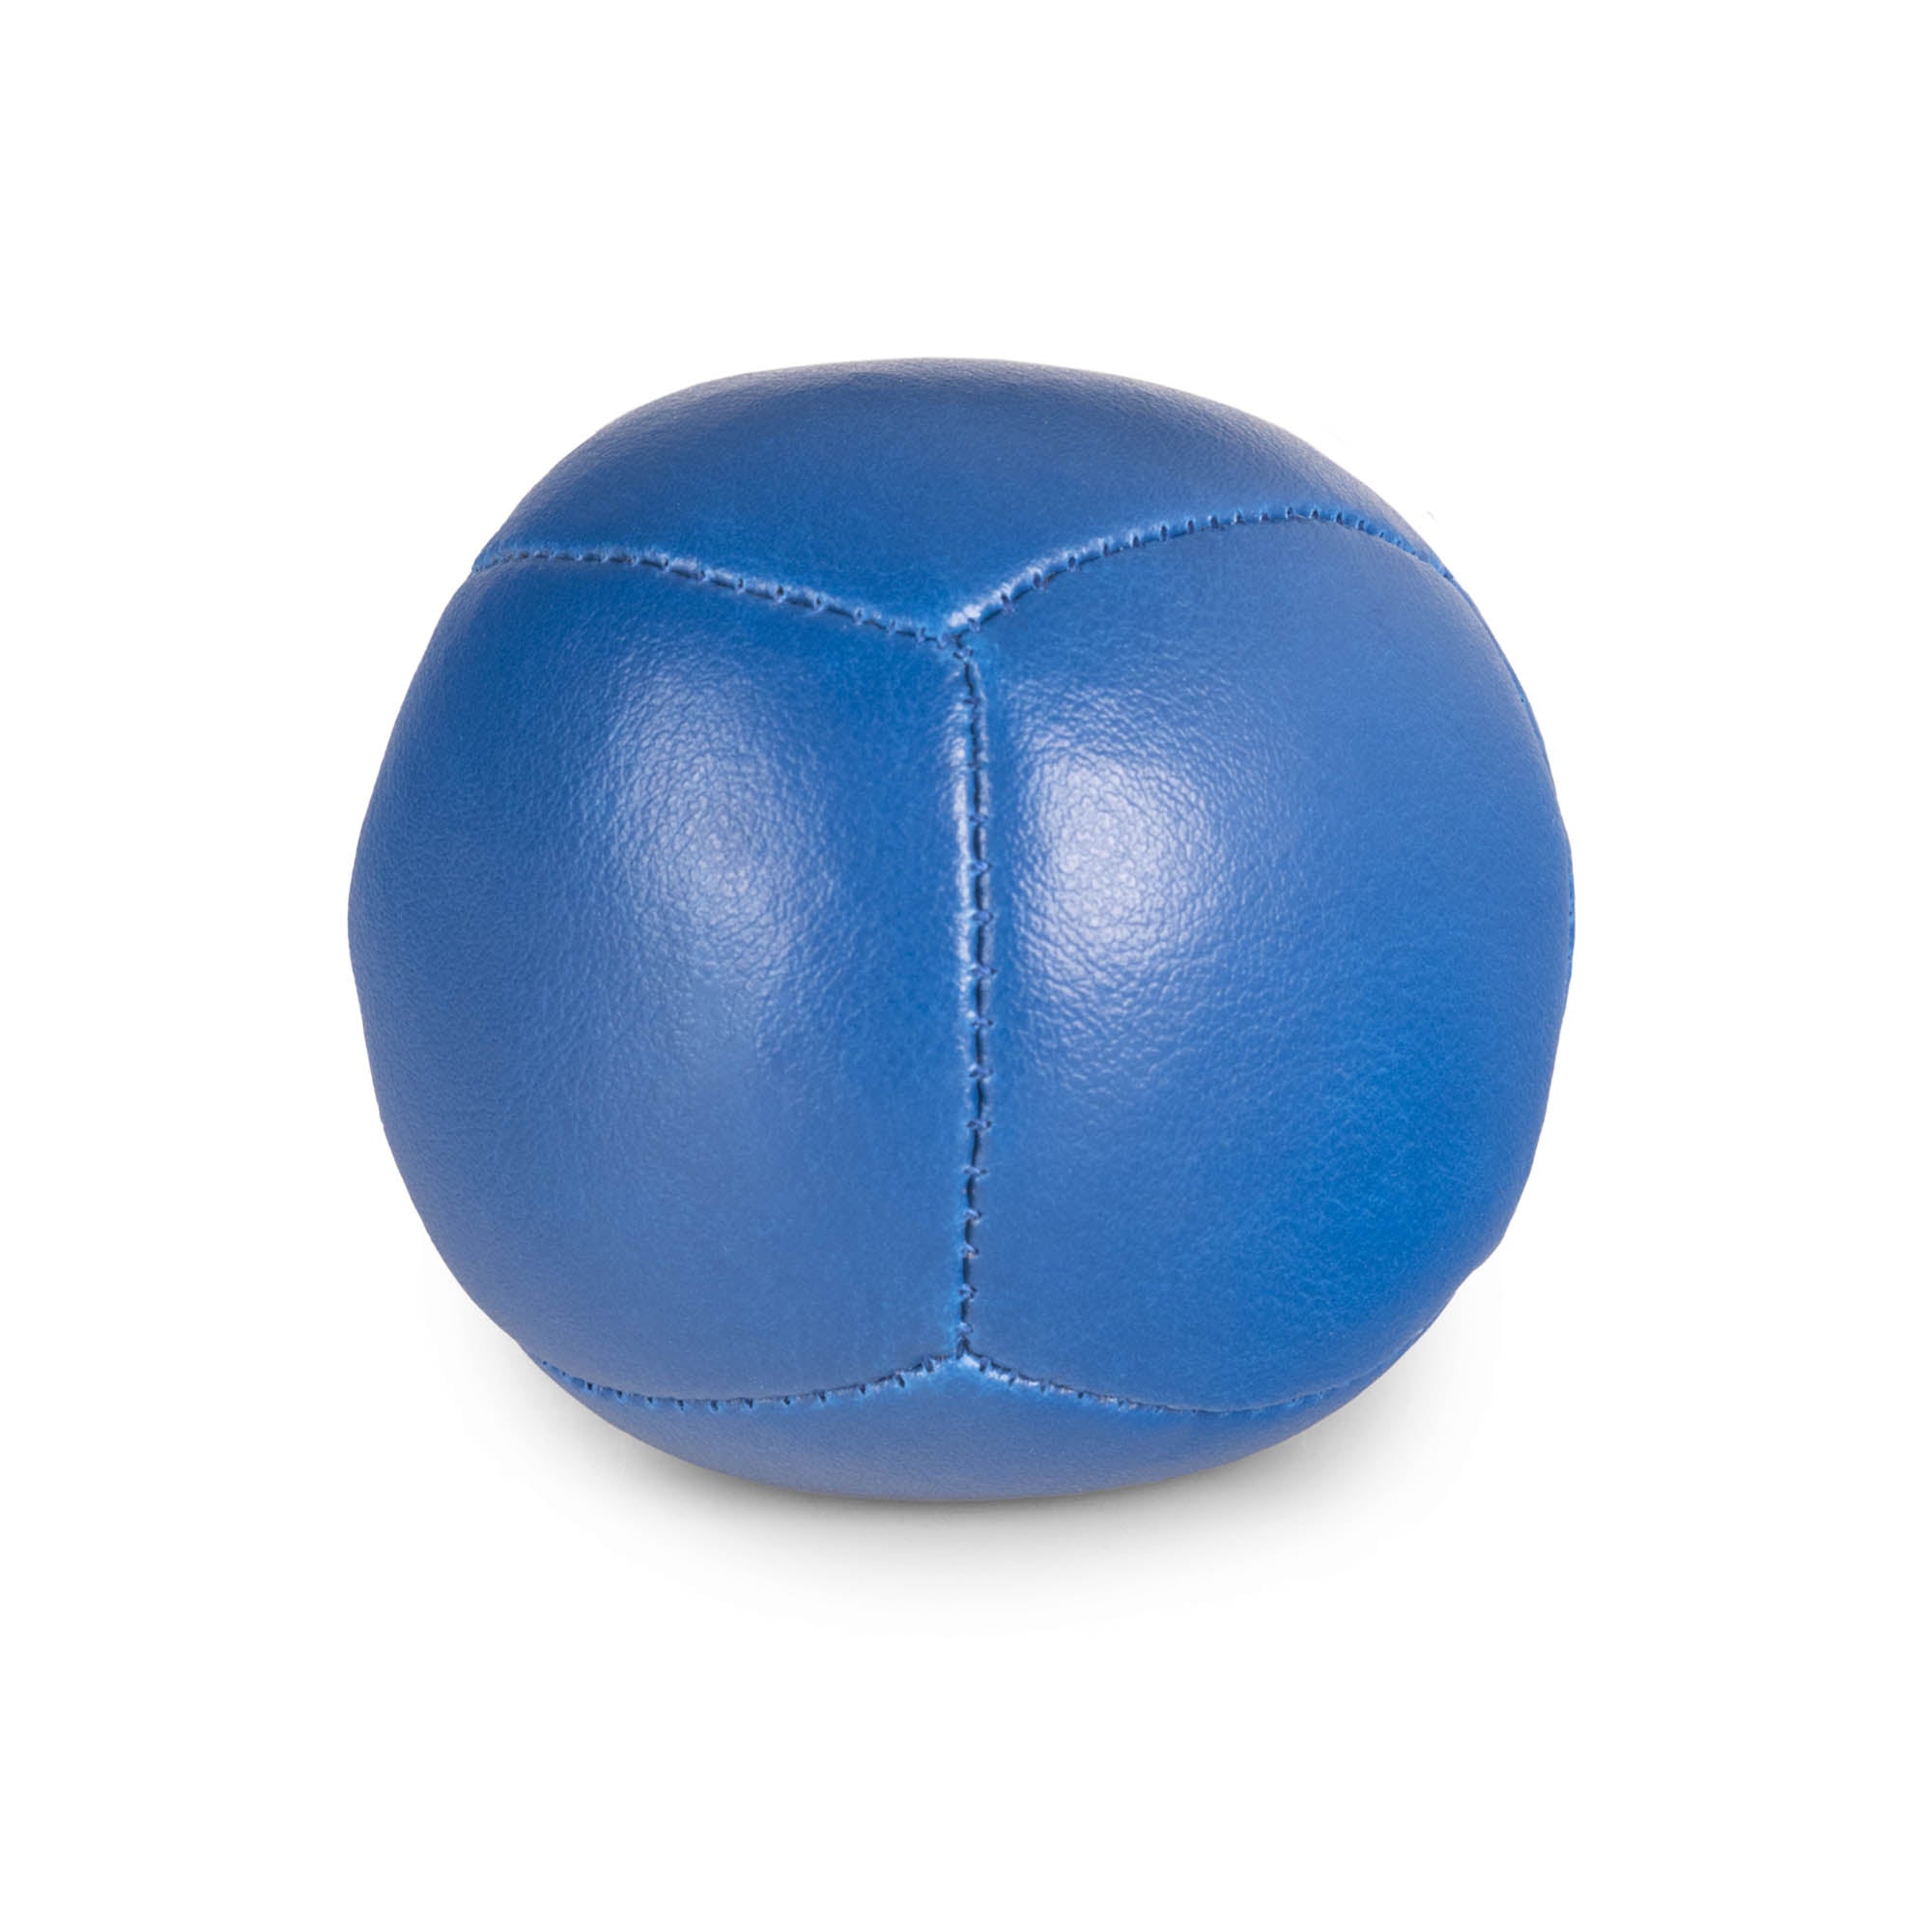 Firetoys blue 110g thud juggling ball, straight on in a white background